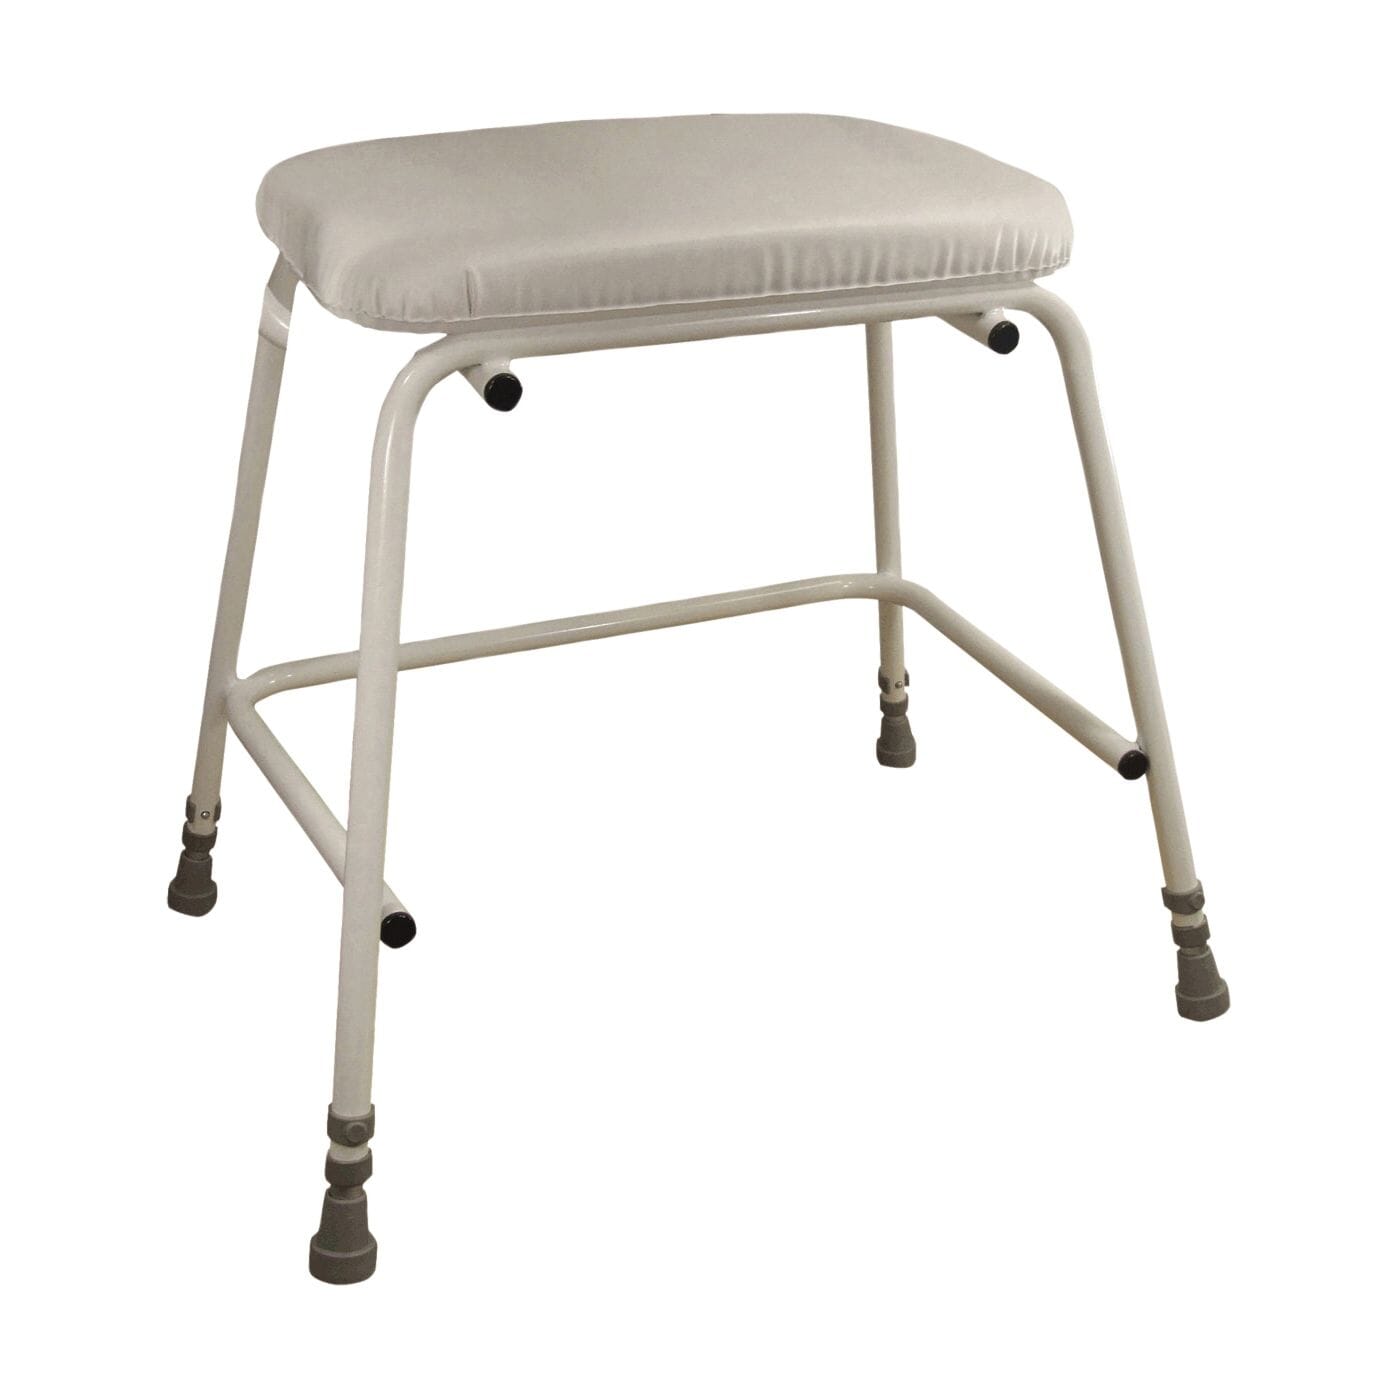 View Torbay Bariatric Perching Stool information